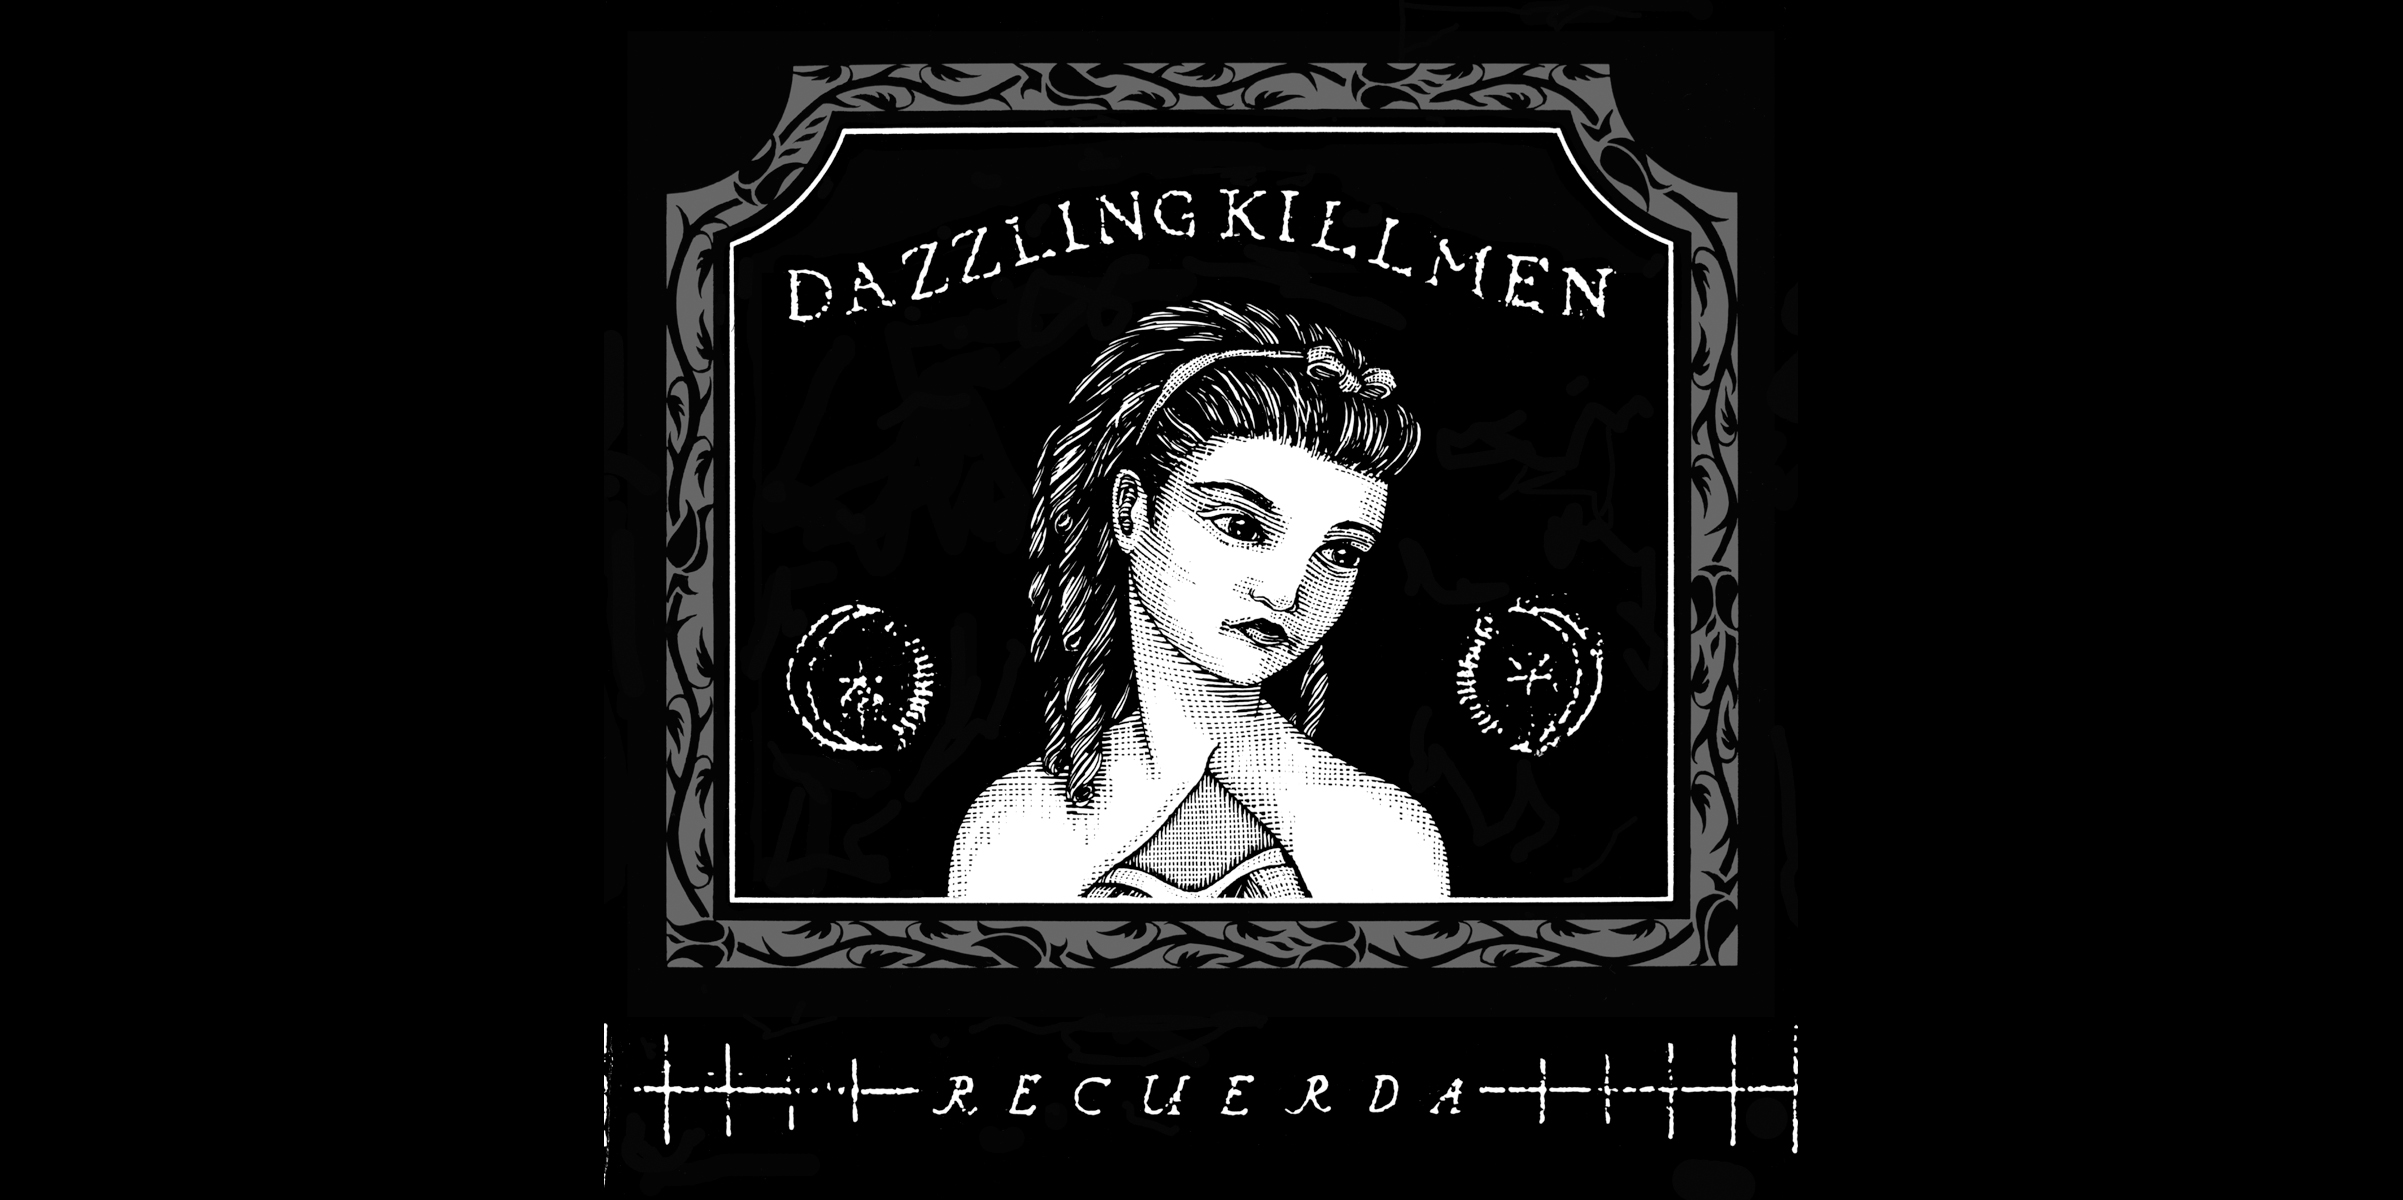   Dazzling Killmen,  Recurada . CD Booklet Cover.  1996. Pen and ink, Scratch board. Released by Skin Graft Records. 